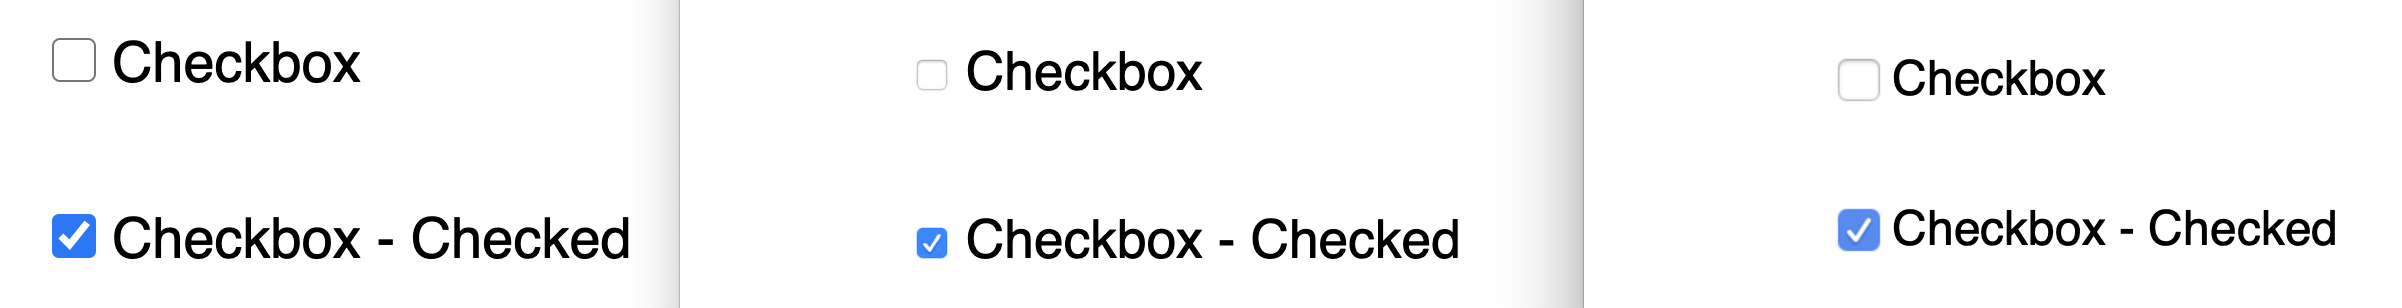 default checkboxes in Chrome, Firefox, and Safari